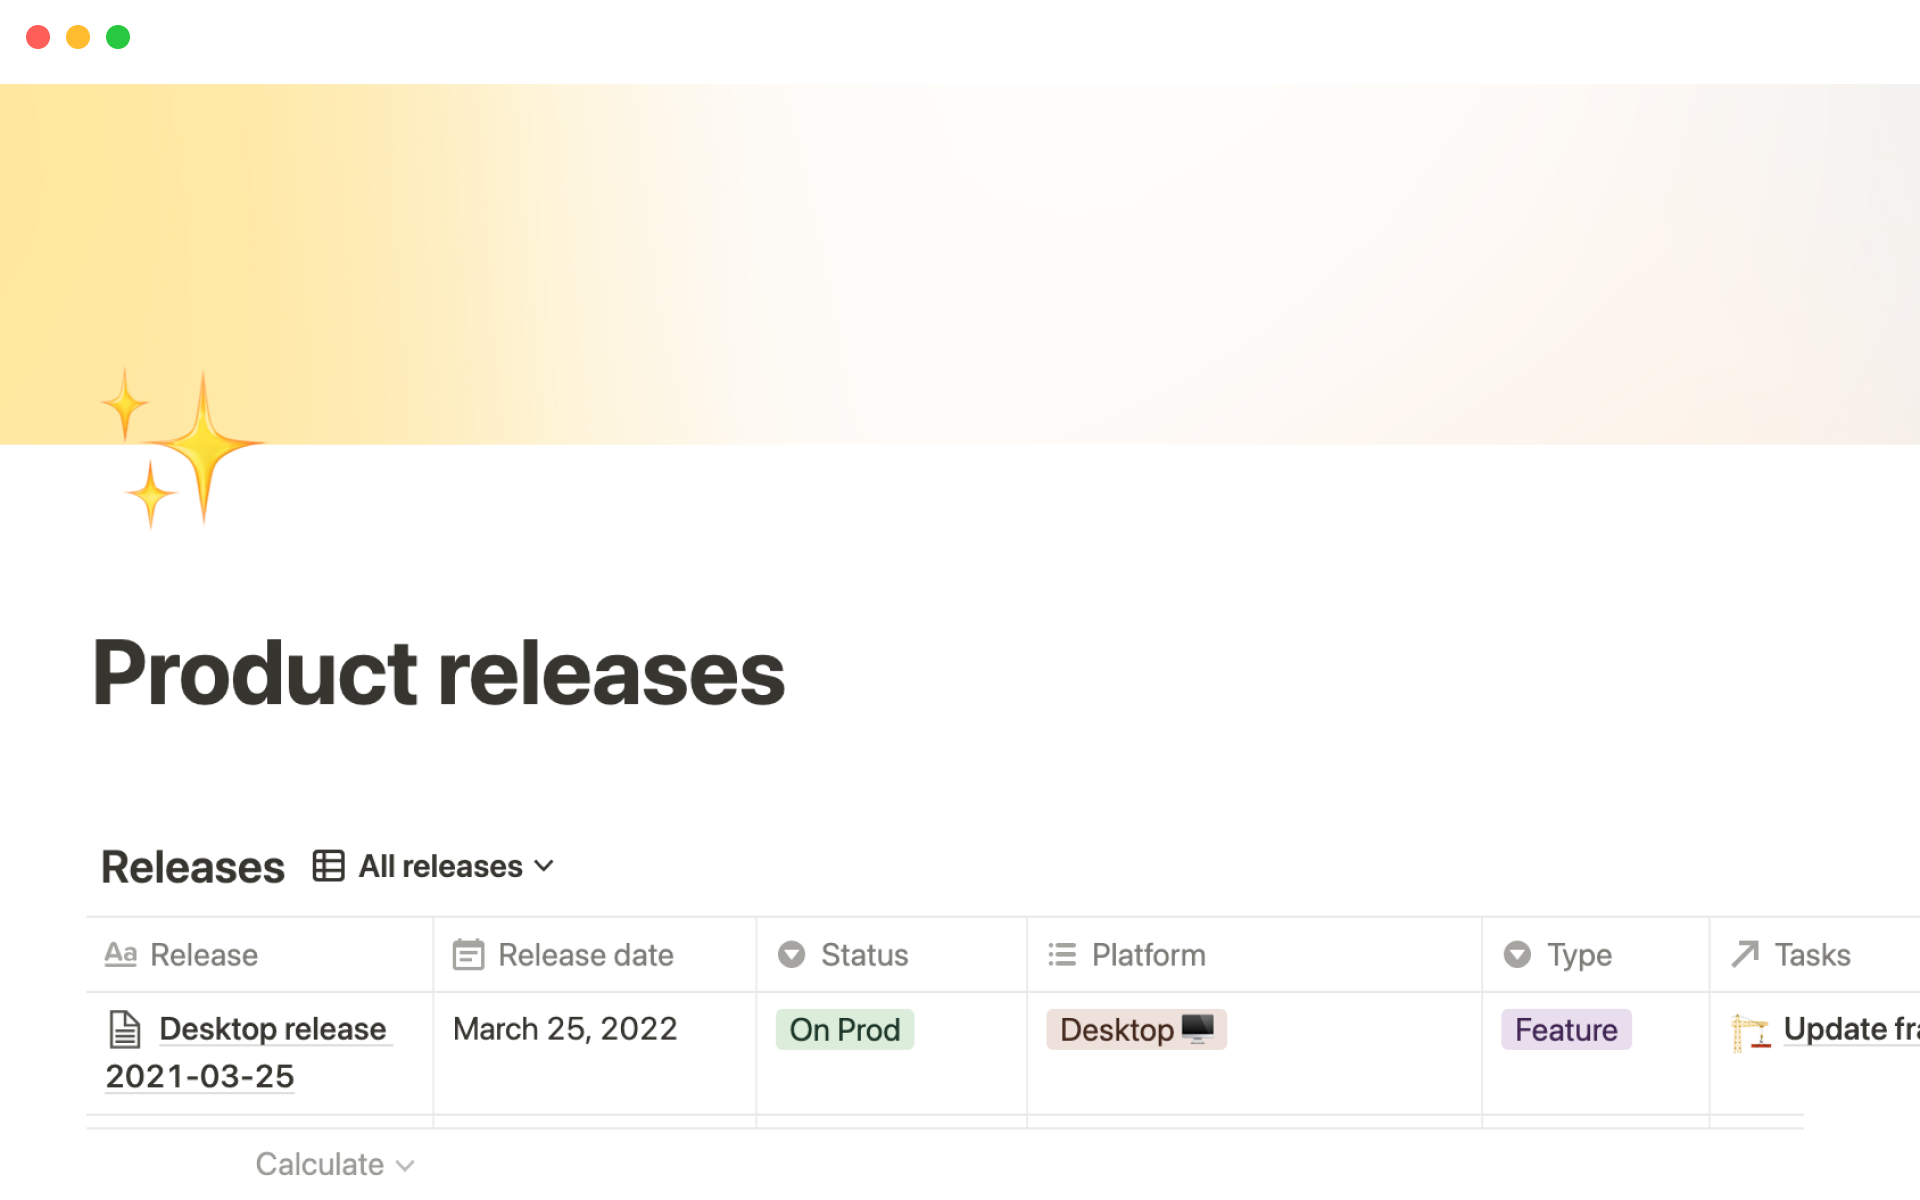 Keep everyone on the team aligned by tracking all your releases in one shared database.